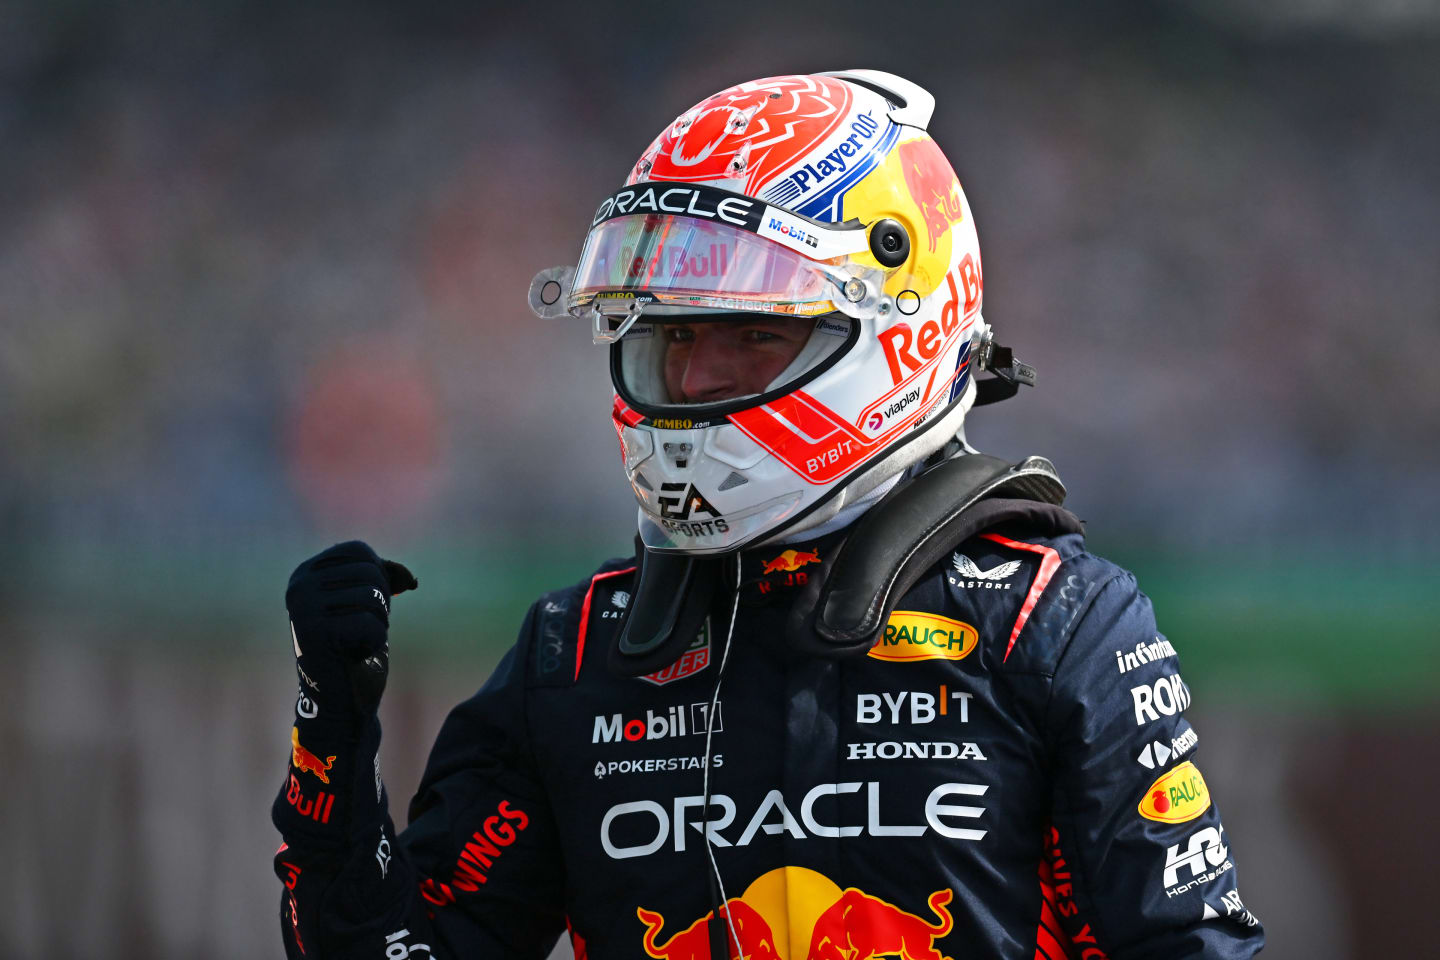 NORTHAMPTON, ENGLAND - JULY 08: Pole position qualifier Max Verstappen of the Netherlands and